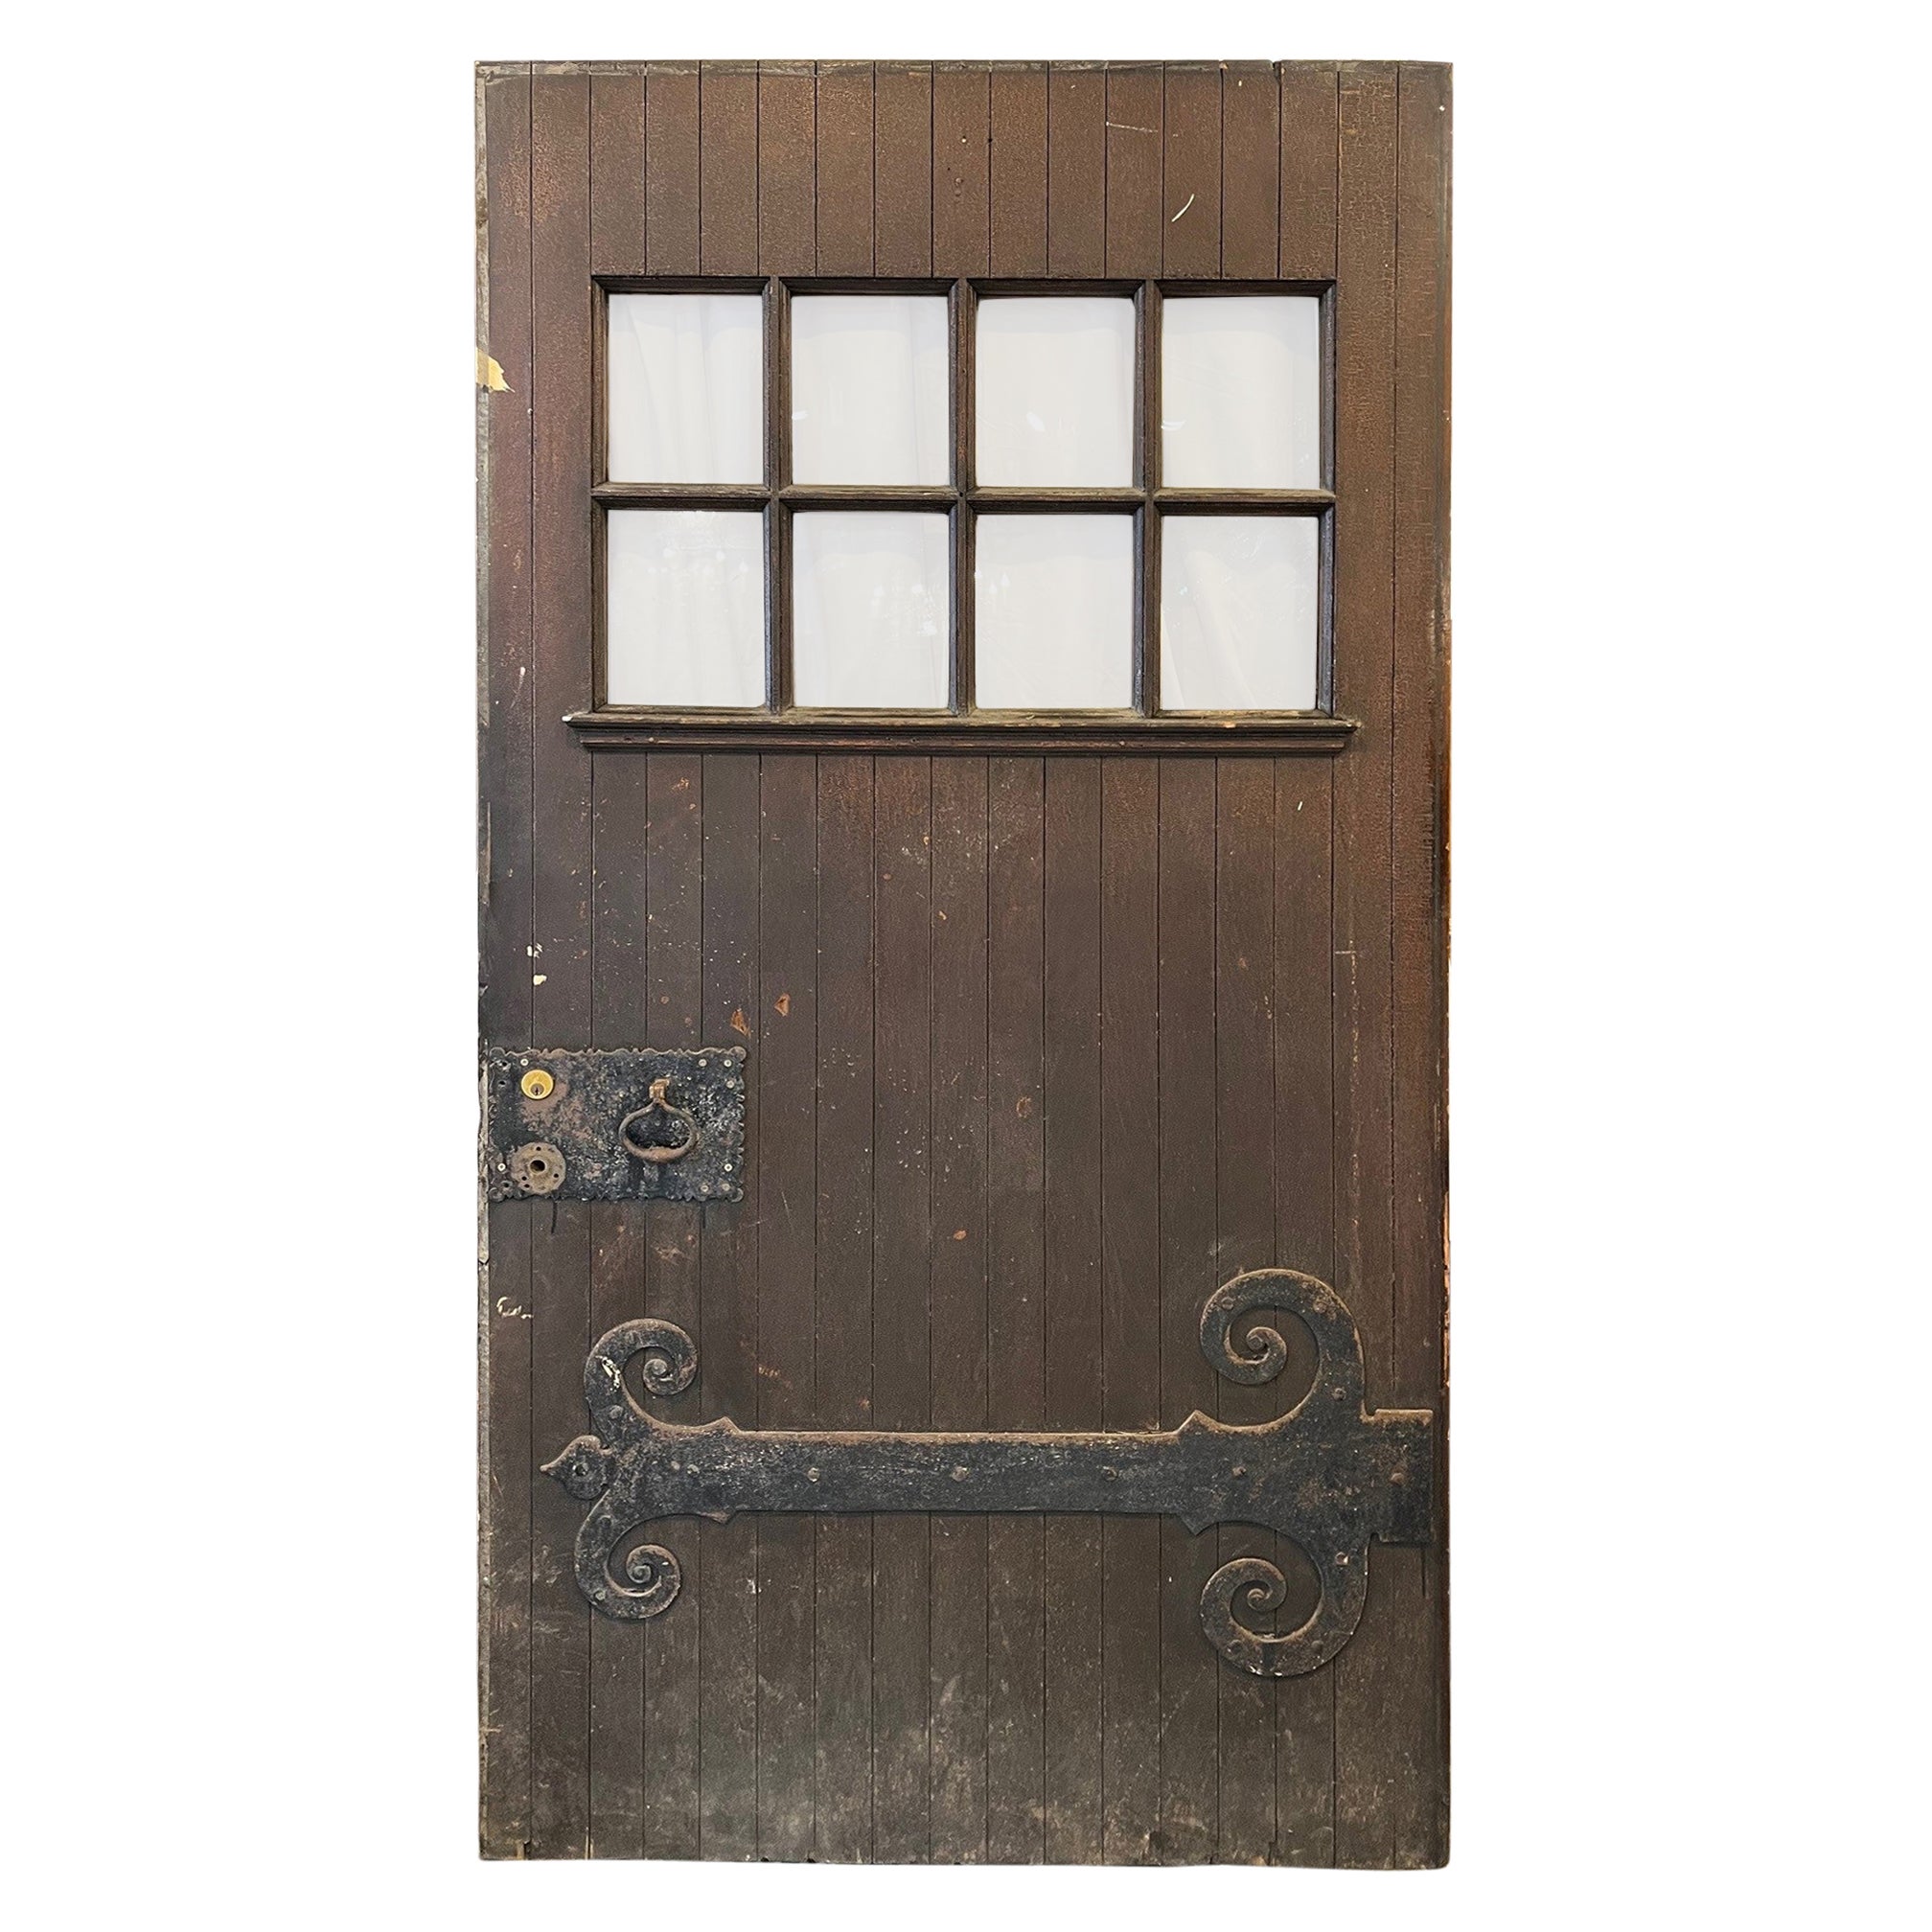 Early 20th Century Antique Oversize Door with Large Iron Hinge For Sale